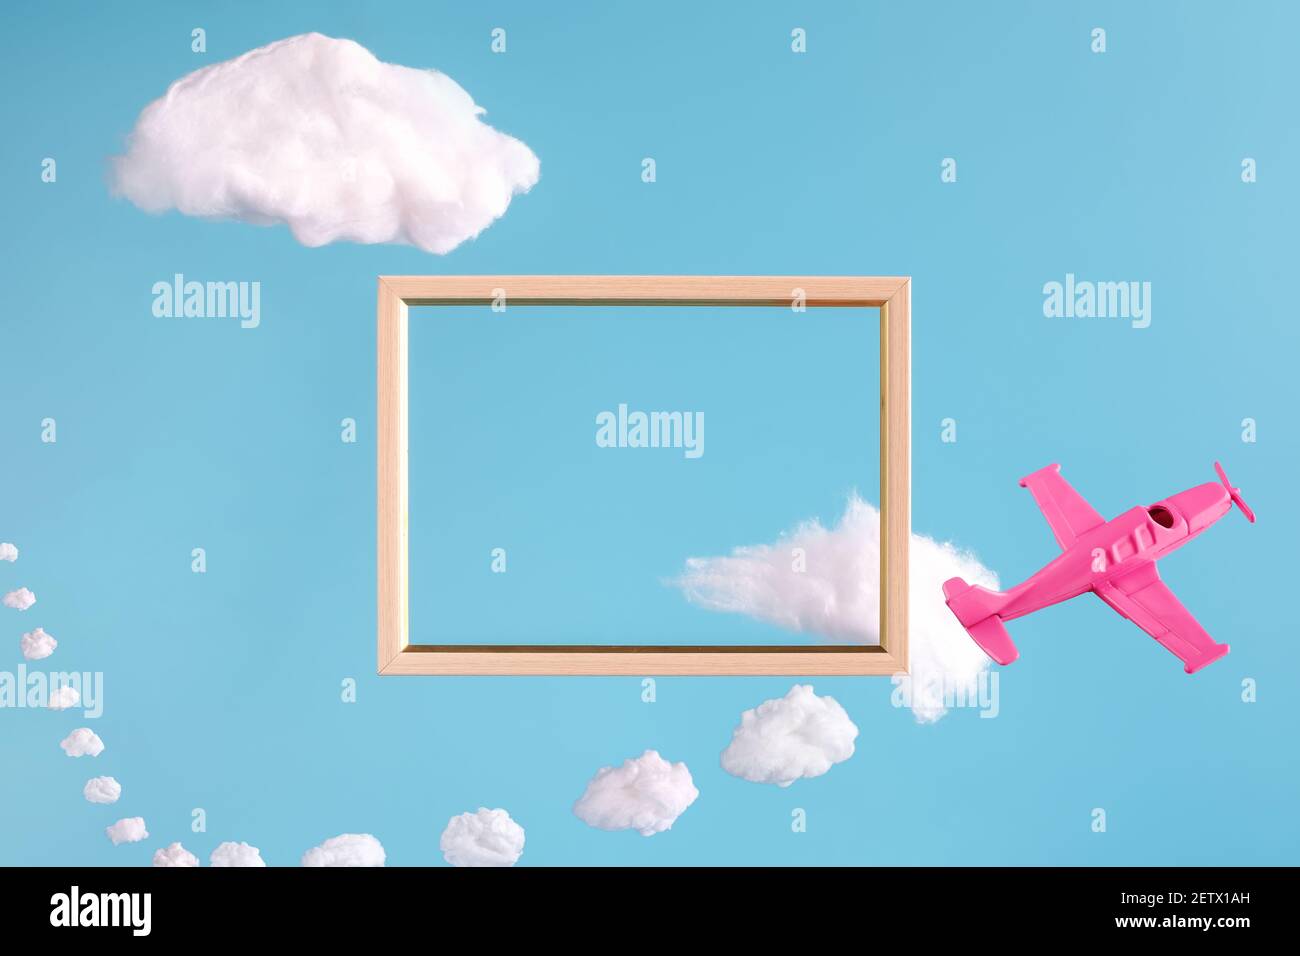 frame on blue background with abstract clouds and pink airplane Stock Photo